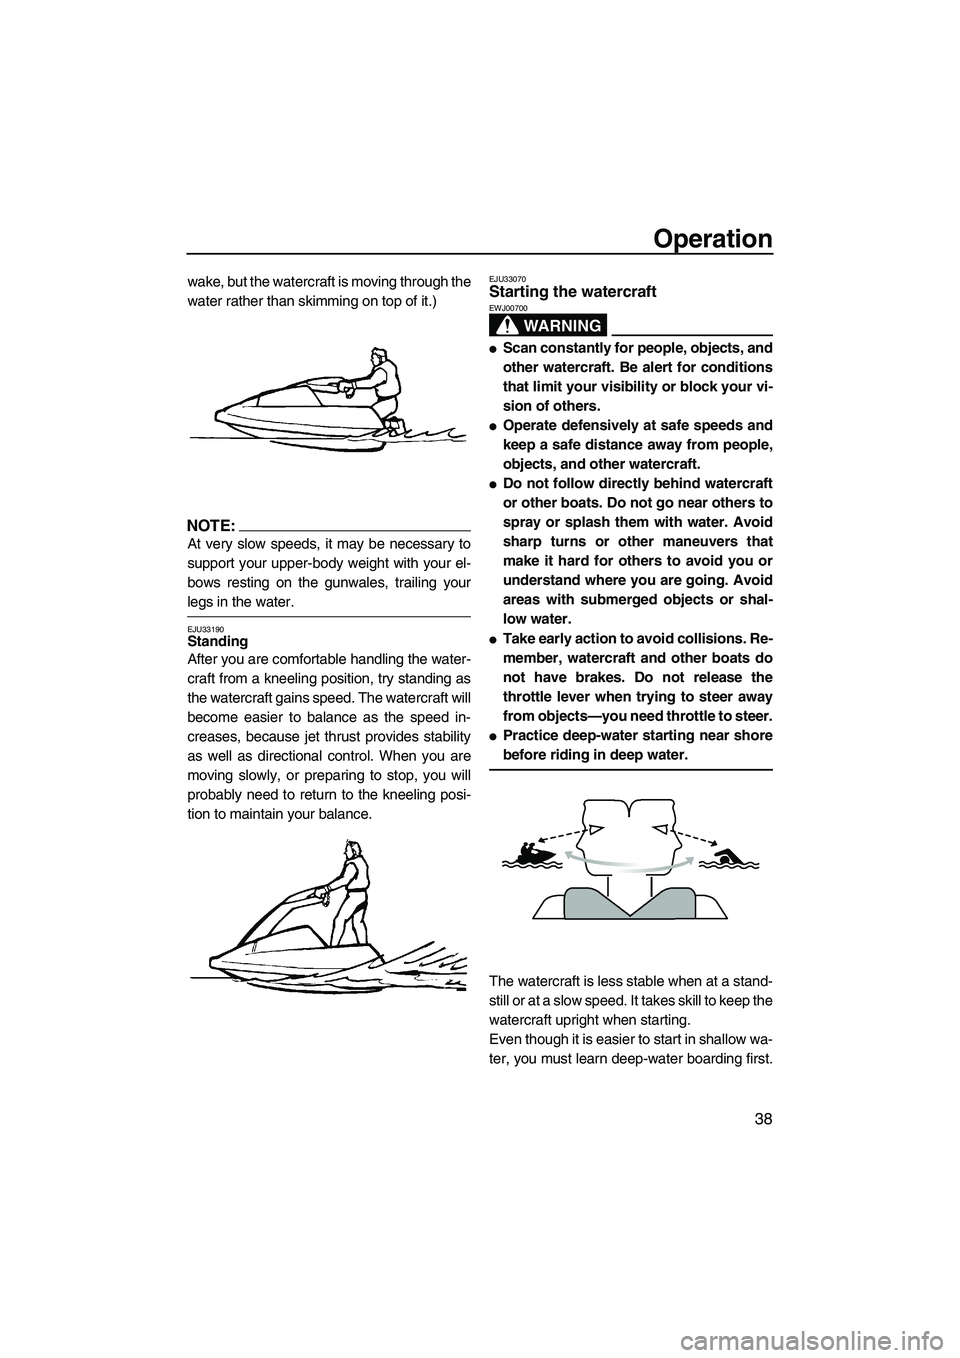 YAMAHA SUPERJET 2007 Service Manual Operation
38
wake, but the watercraft is moving through the
water rather than skimming on top of it.)
NOTE:
At very slow speeds, it may be necessary to
support your upper-body weight with your el-
bow